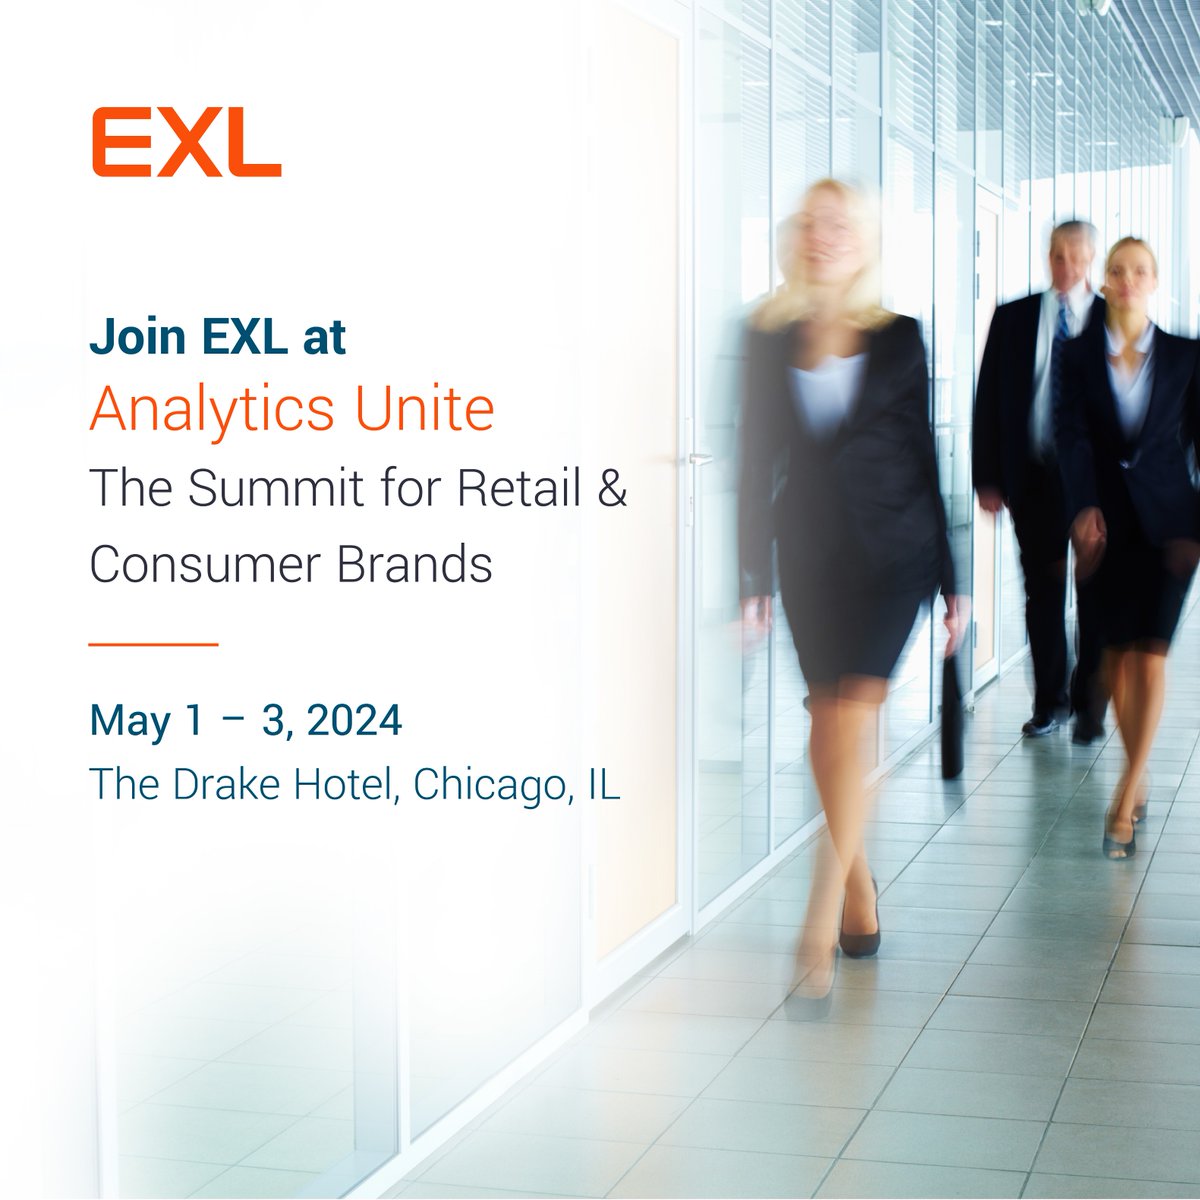 We're excited to be a sponsor for Analytics Unite, May 1-3 in Chicago. Analytics Unite is one of the retail and consumer product industries’ leading events dedicated to sharing strategies that drive innovation, efficiency, and revenue. Register today! bit.ly/3TQBIcN